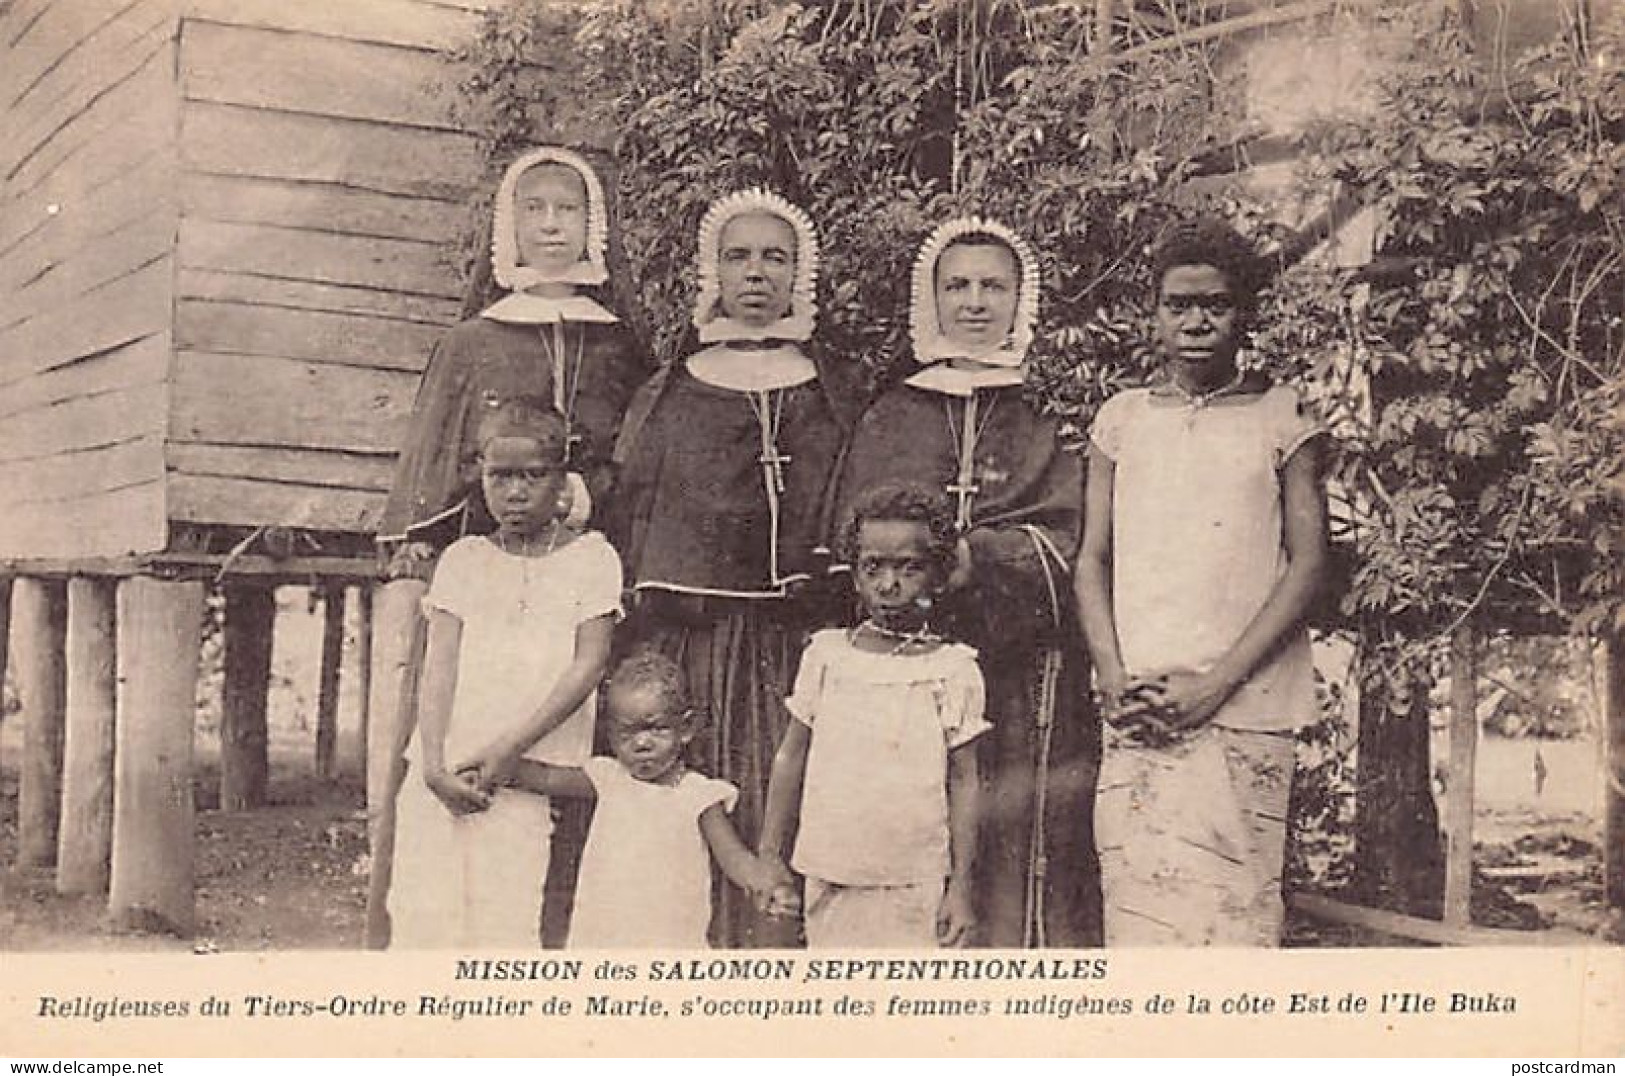 Papua New Guinea - BUKA ISLAND - Nuns Of The Third Order Regular Of Mary Caring For Indigenous Women On The East Coast O - Papoea-Nieuw-Guinea